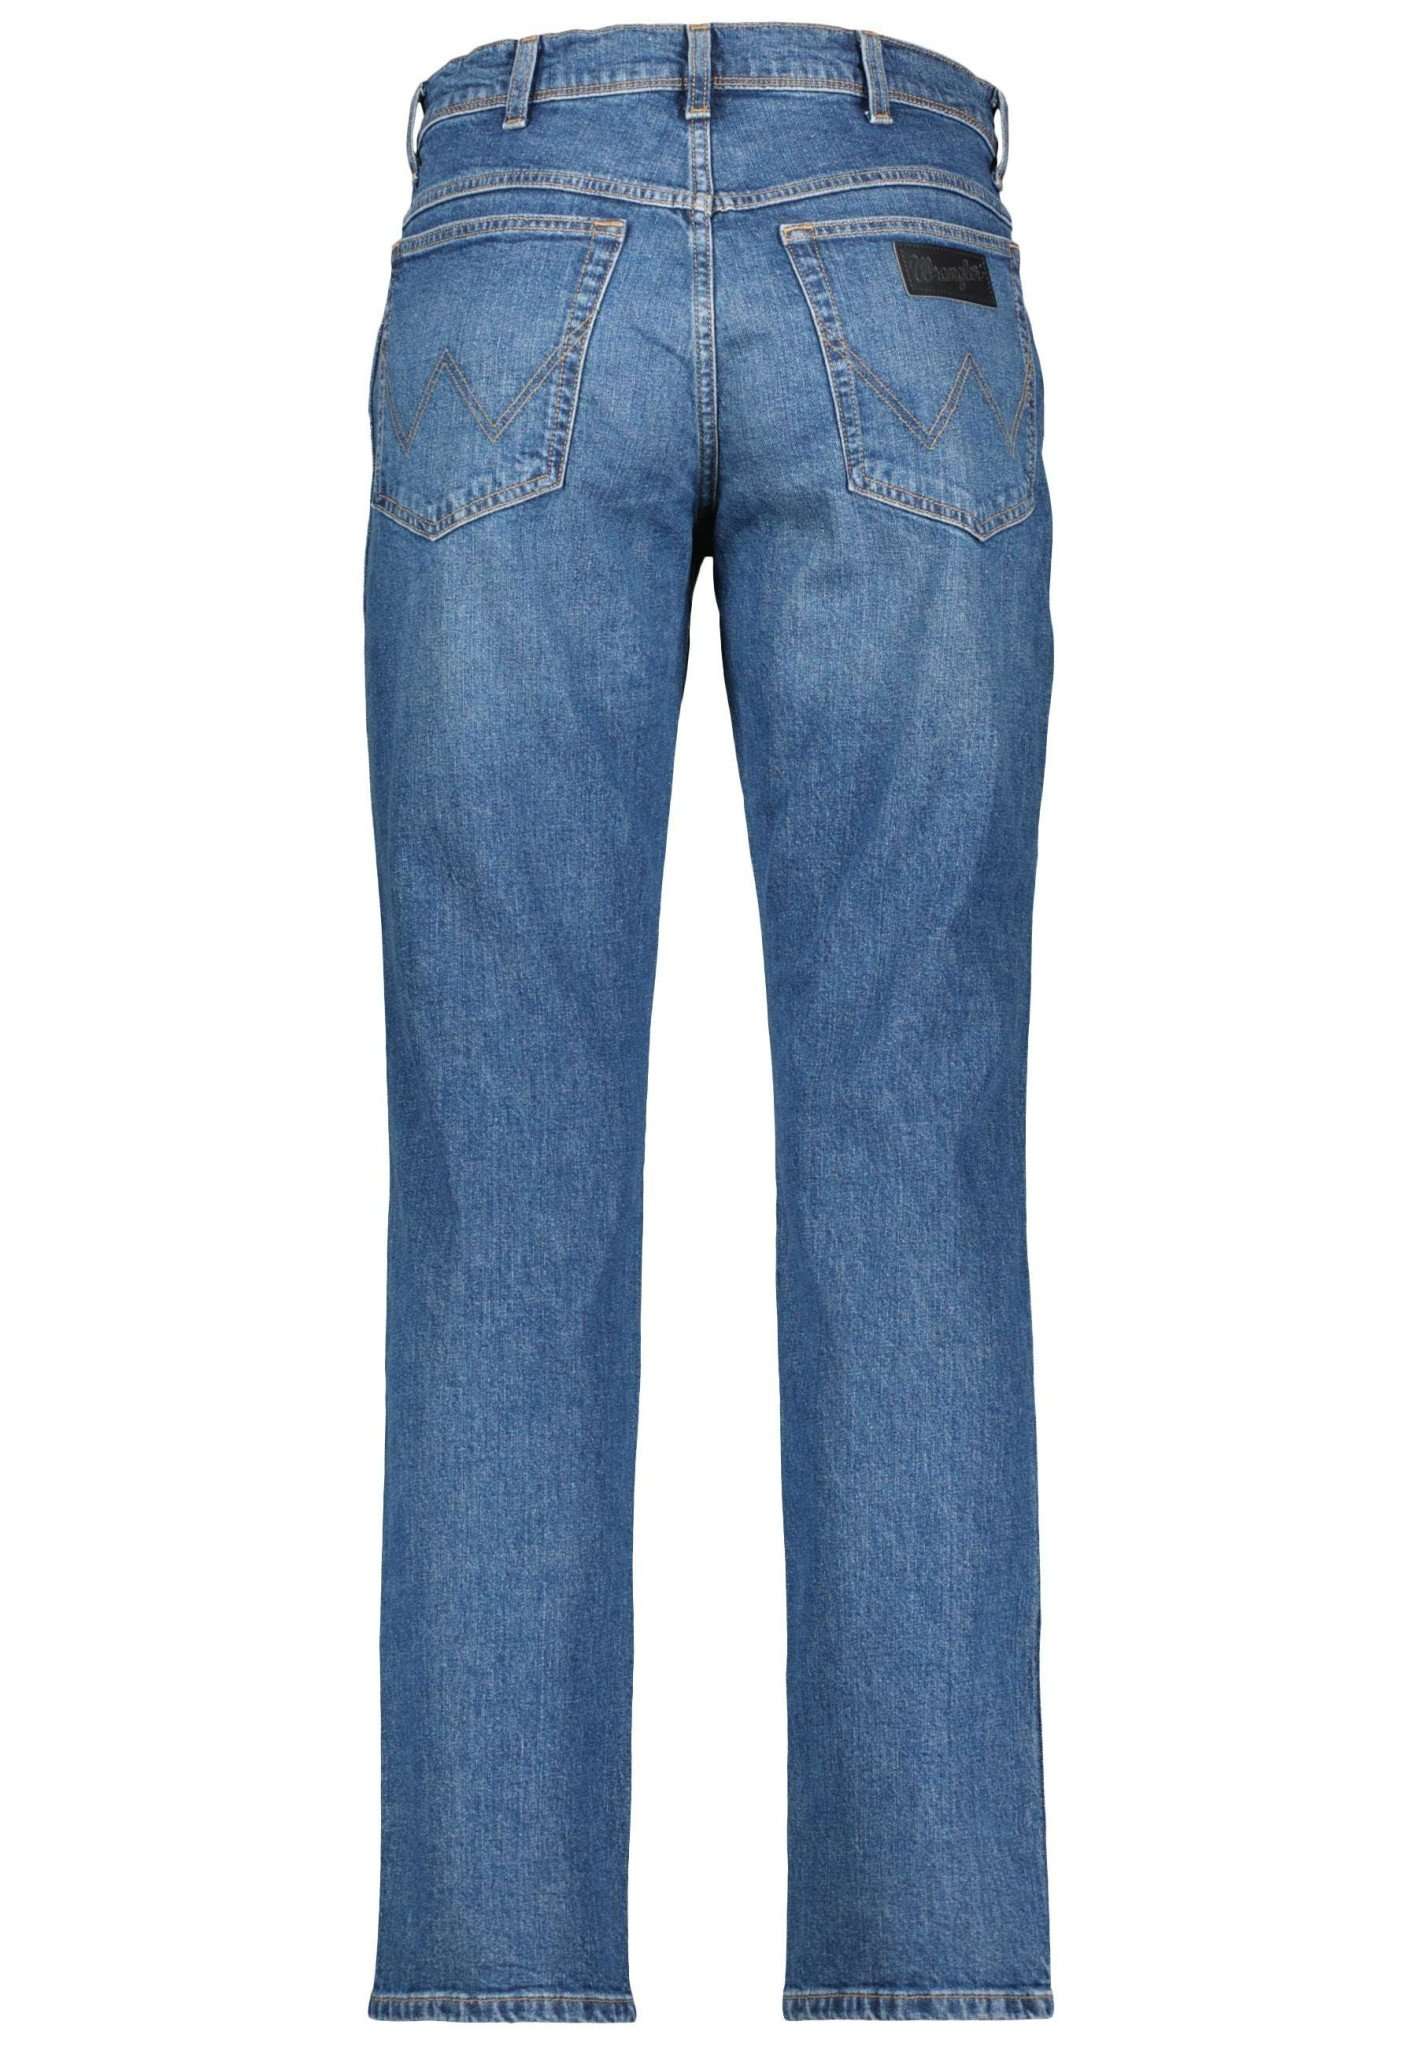 Texas Slim Low Stretch in Bruised Blue Jeans Wrangler   